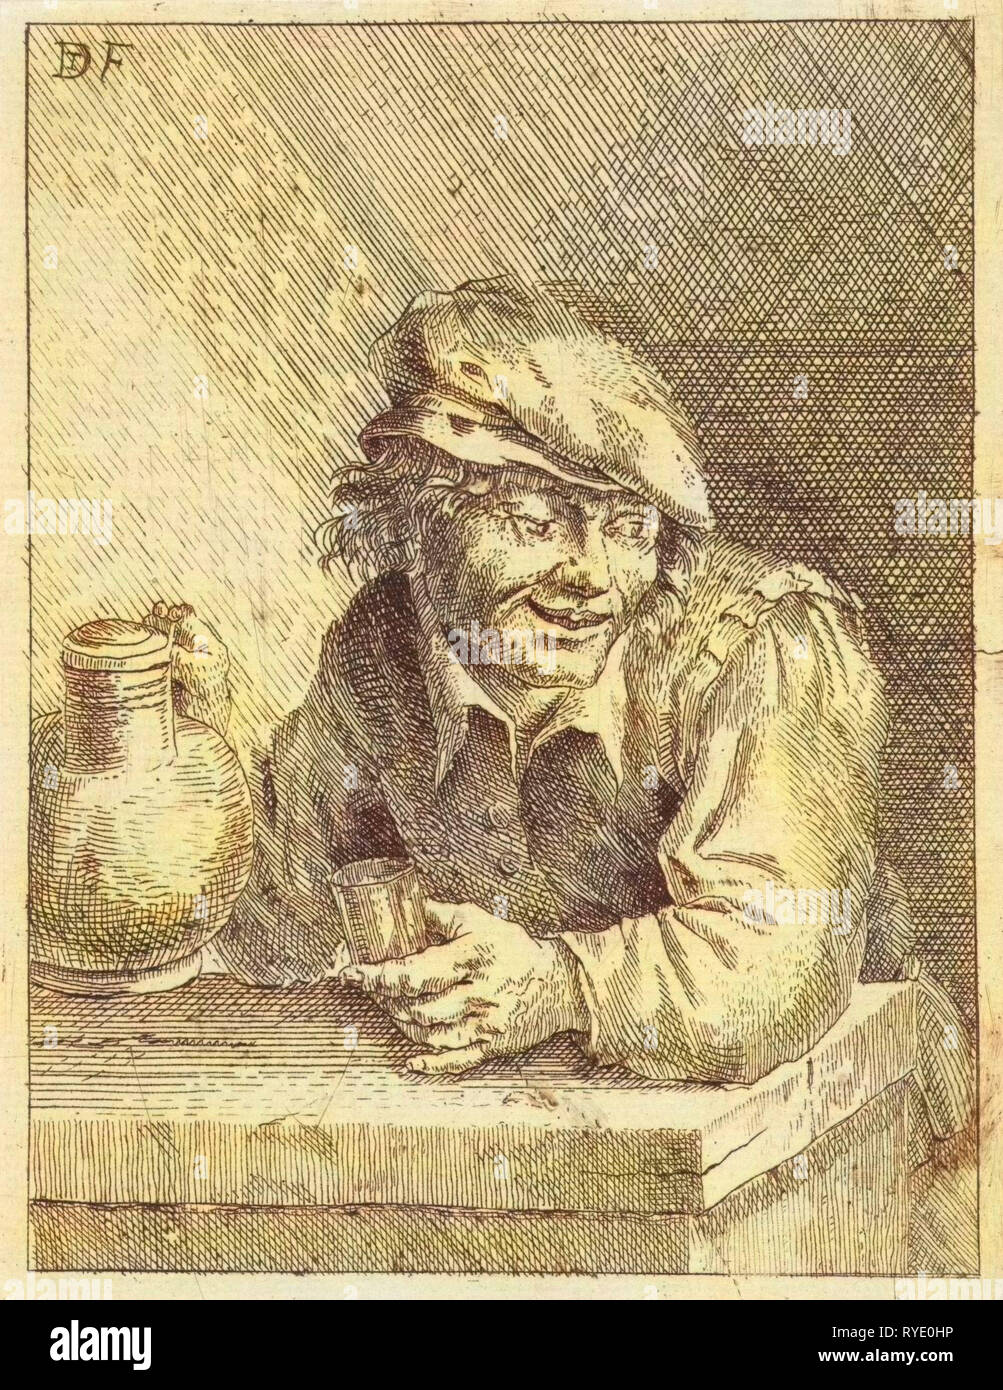 Farmer, anonyme, 1626-1640 Banque D'Images